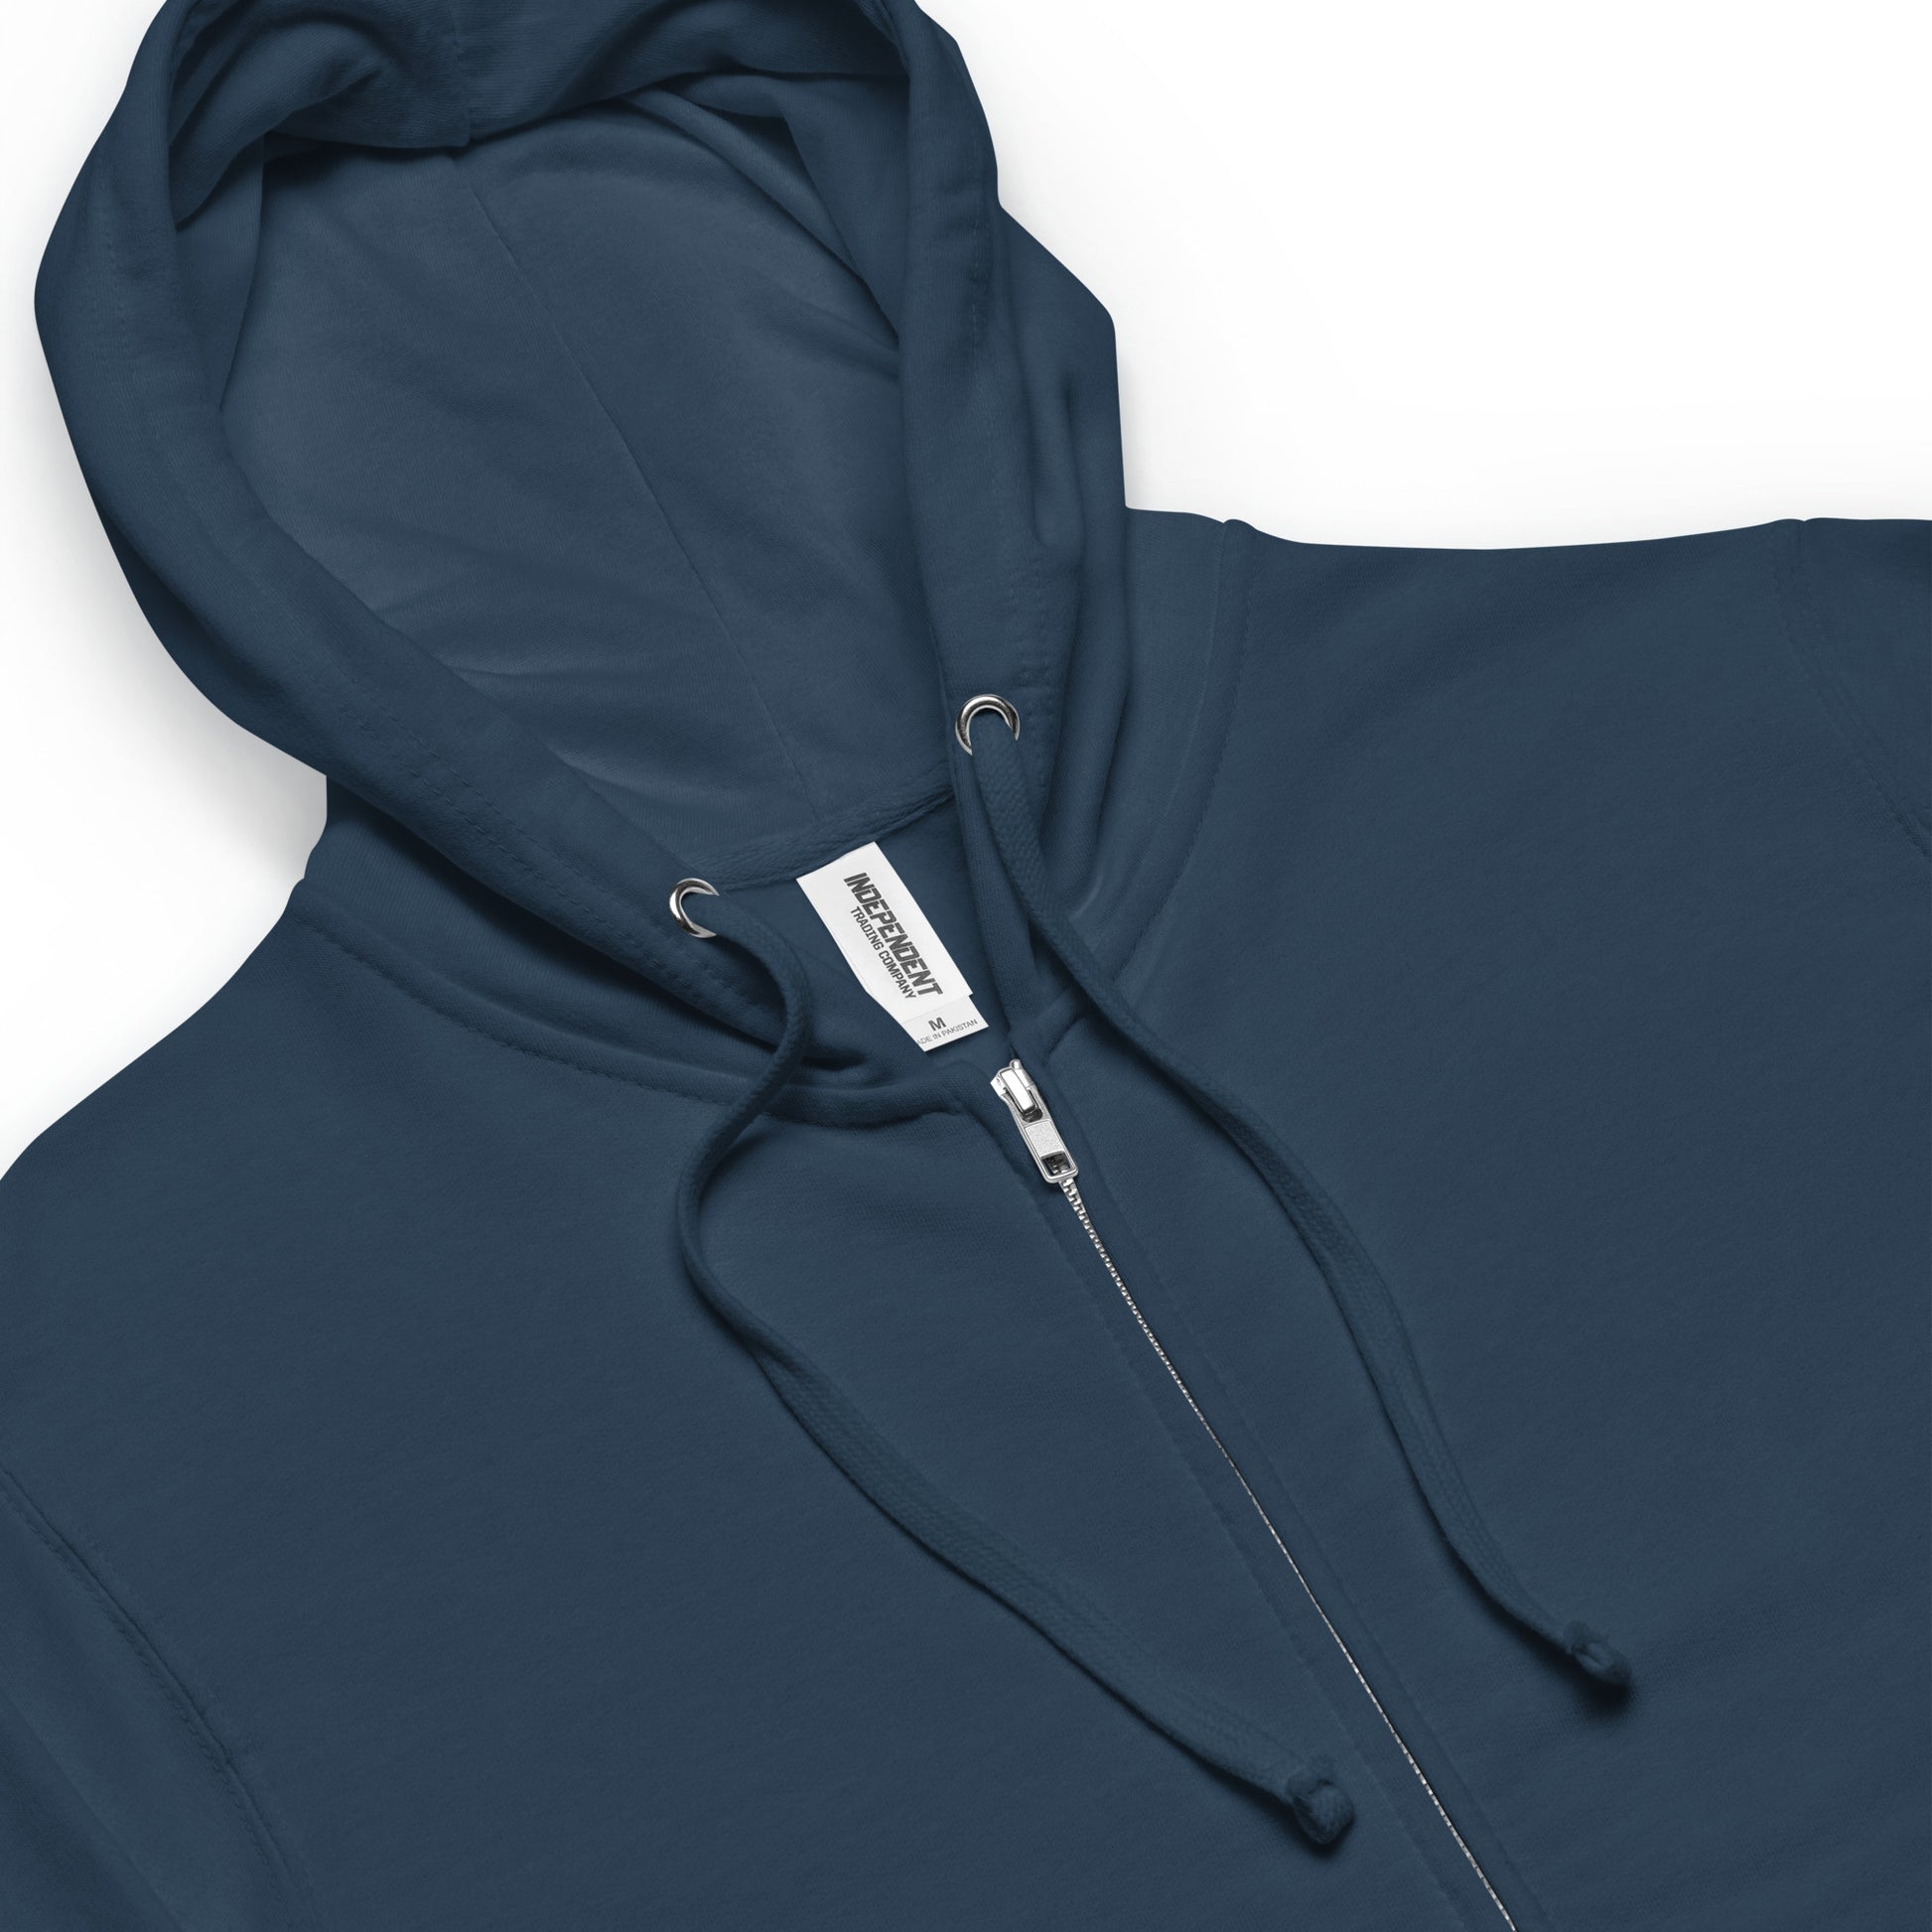 Navy blue colored unisex fleece zip-up hoodie. Features a back design of Nikolai the root beer float fuzzy noodle dragon. Detail image shows metal eyelets, draw cords, lined hood, and metal zipper.